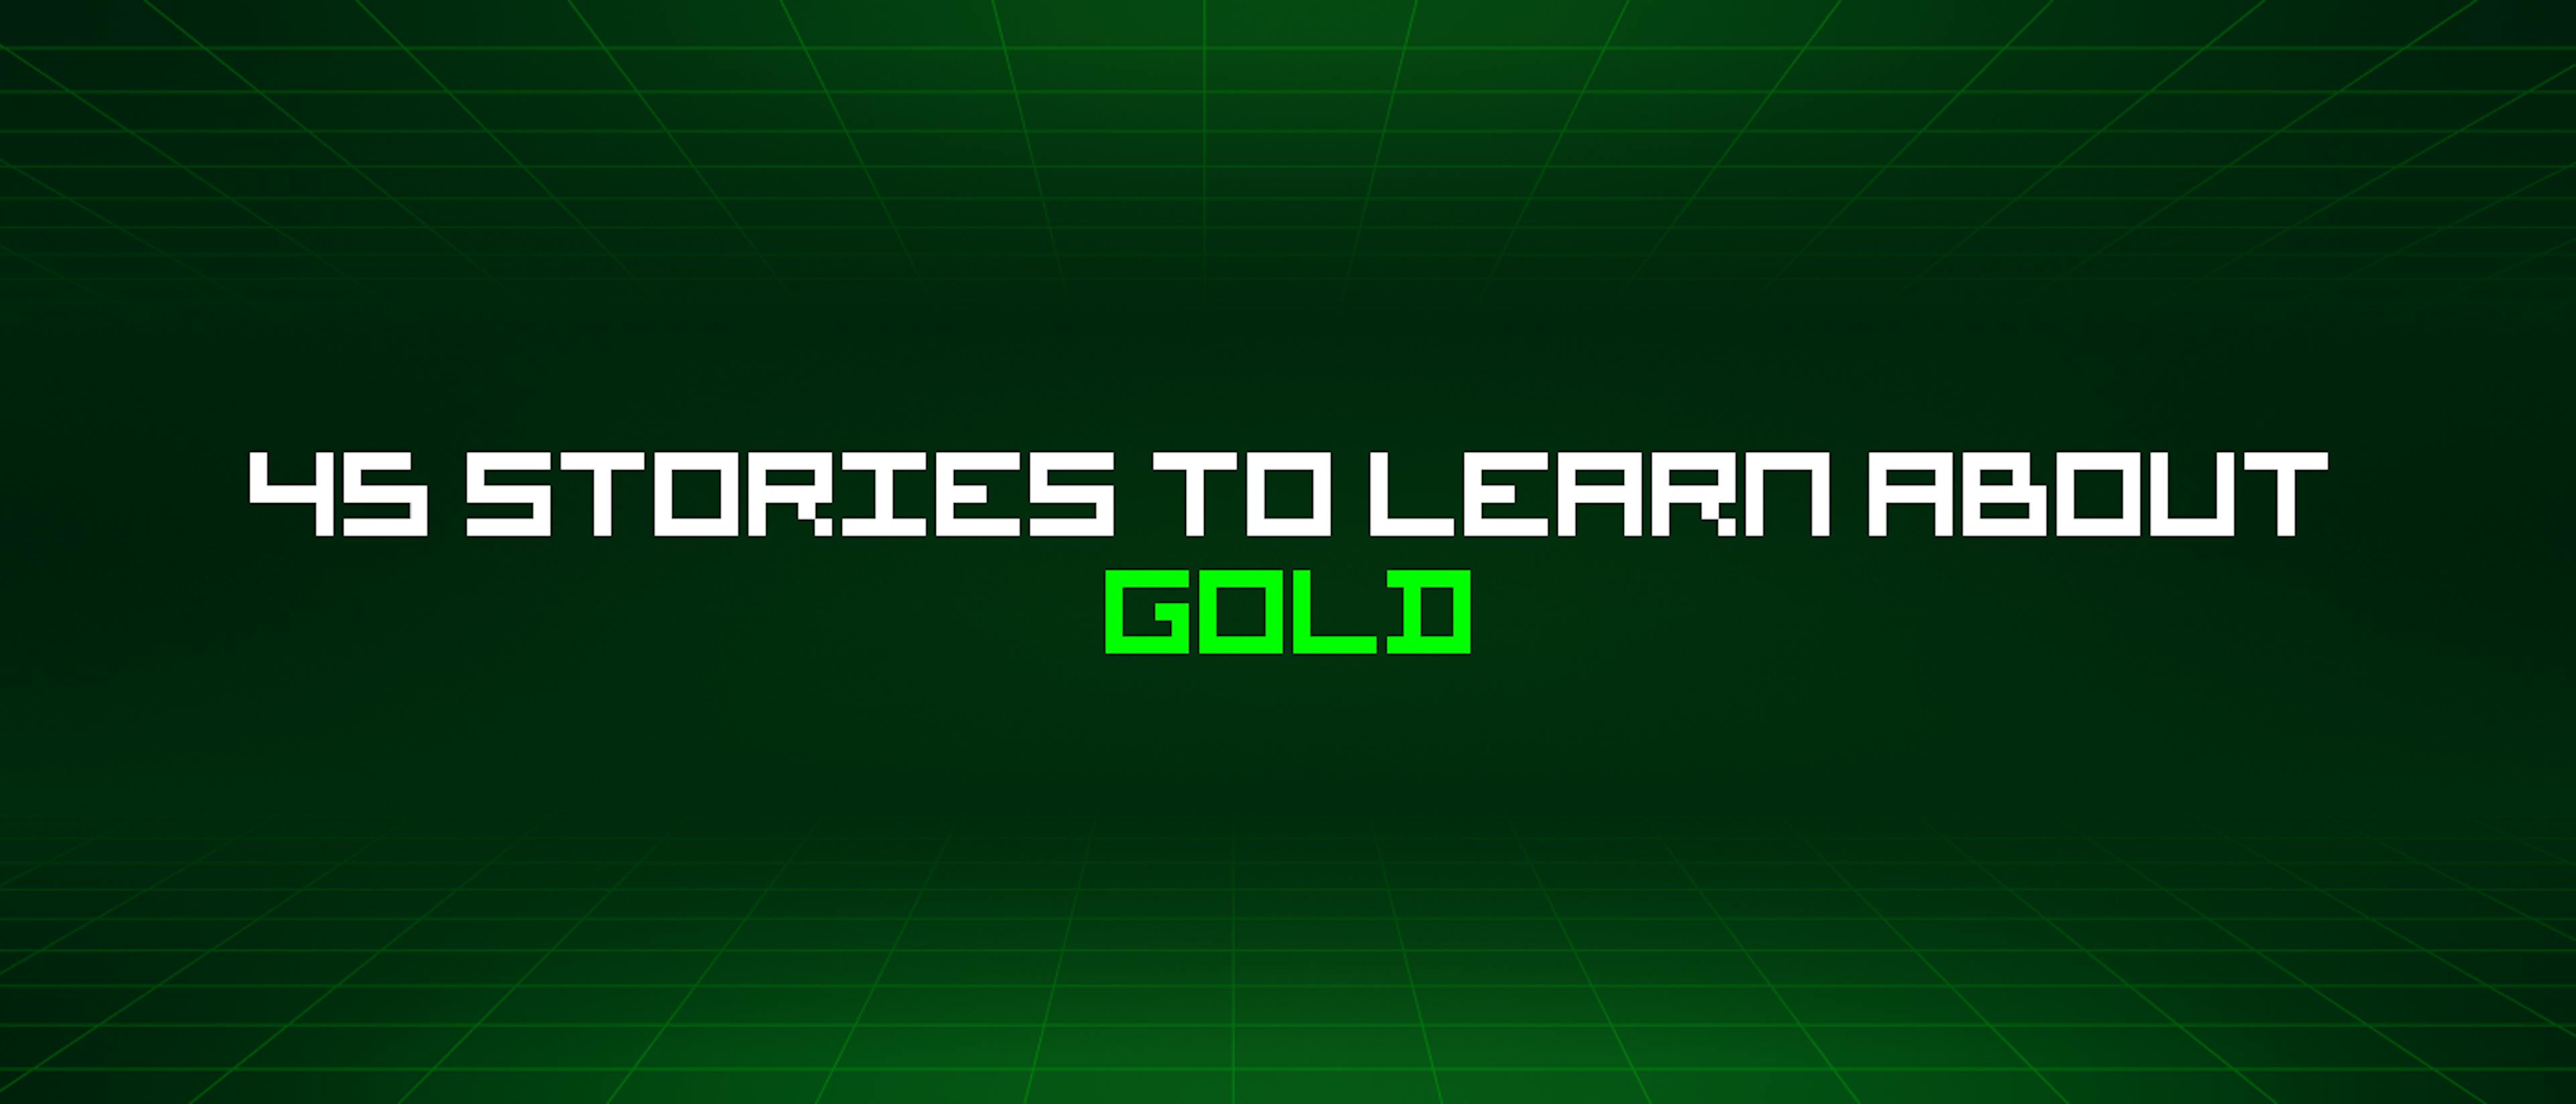 featured image - 45 Stories To Learn About Gold